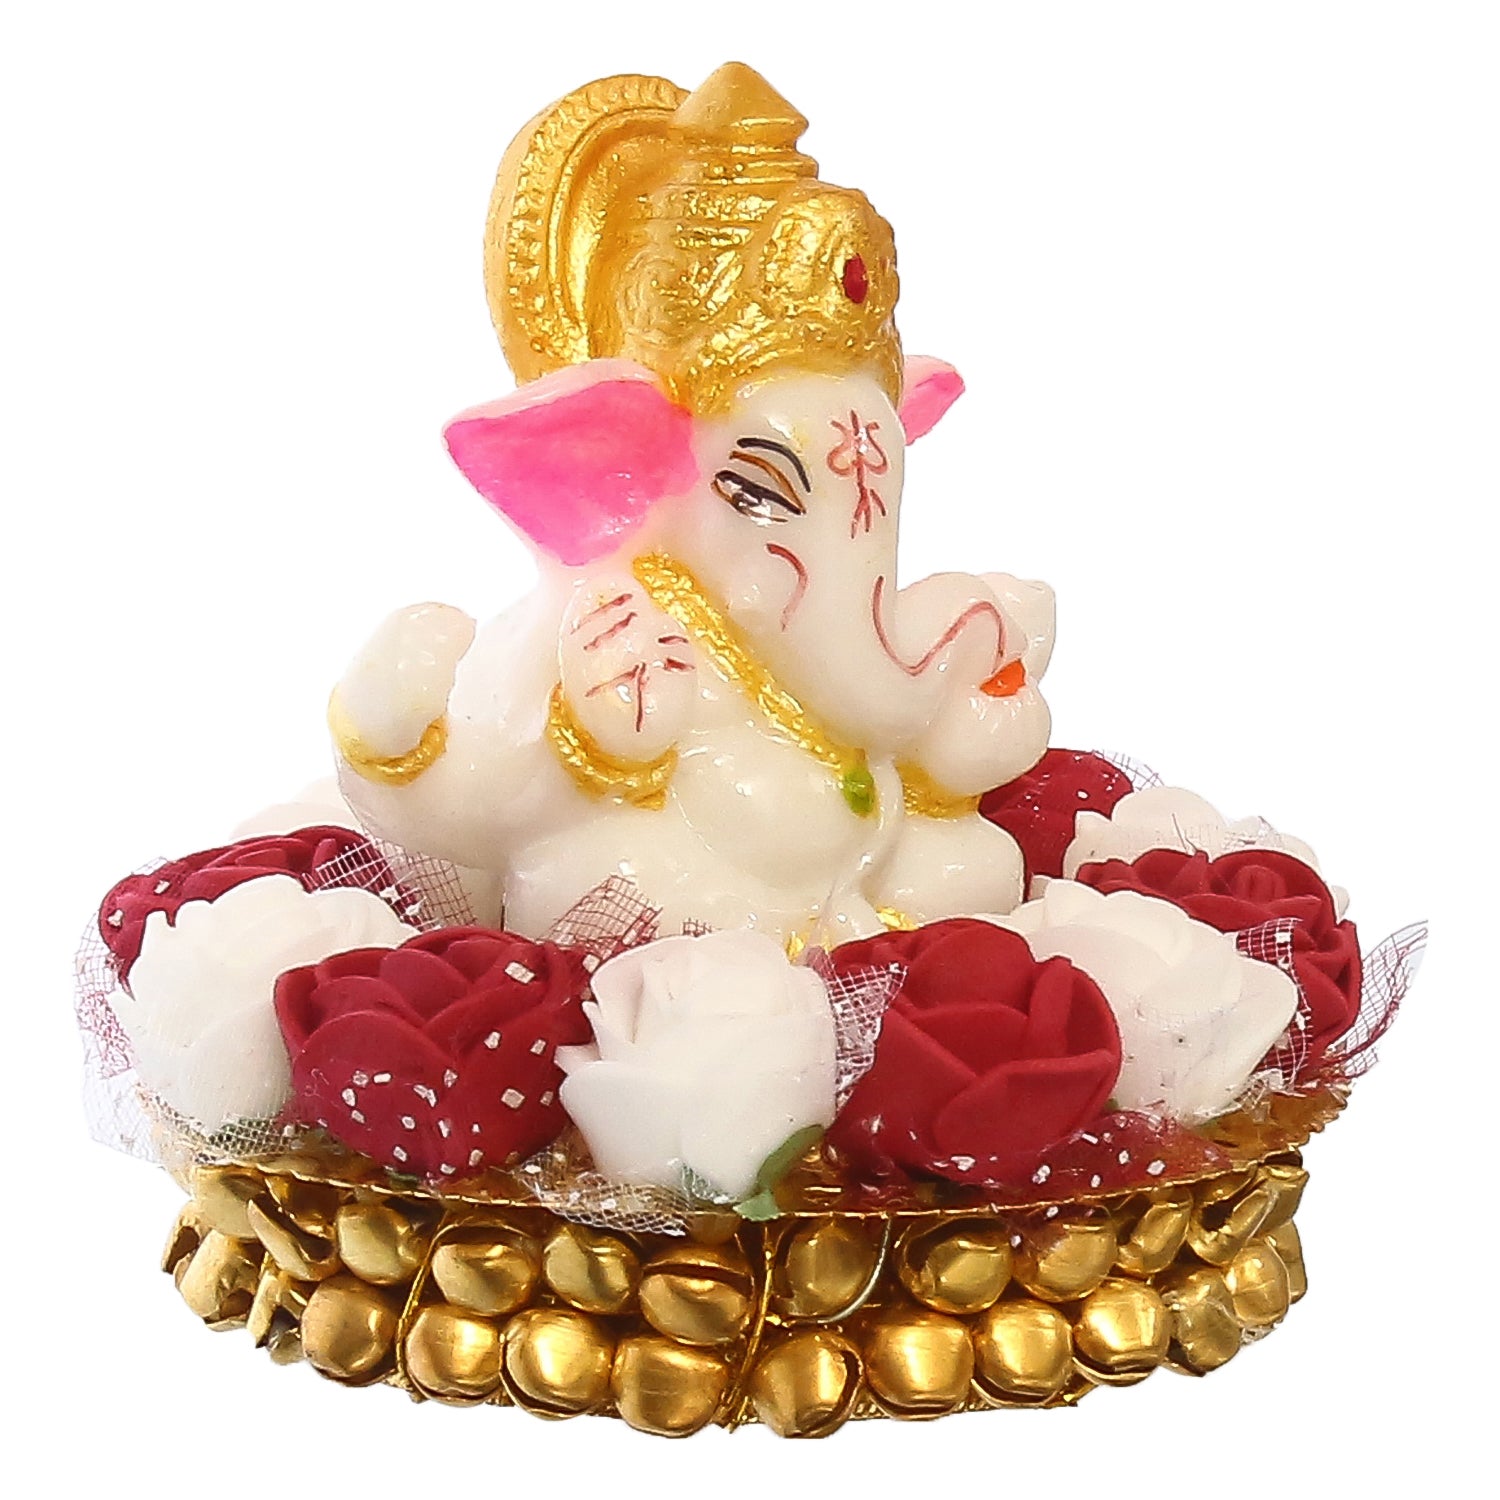 Golden and White Polyresin Lord Ganesha Idol on Decorative Handcrafted Plate with Red and White Flowers 4